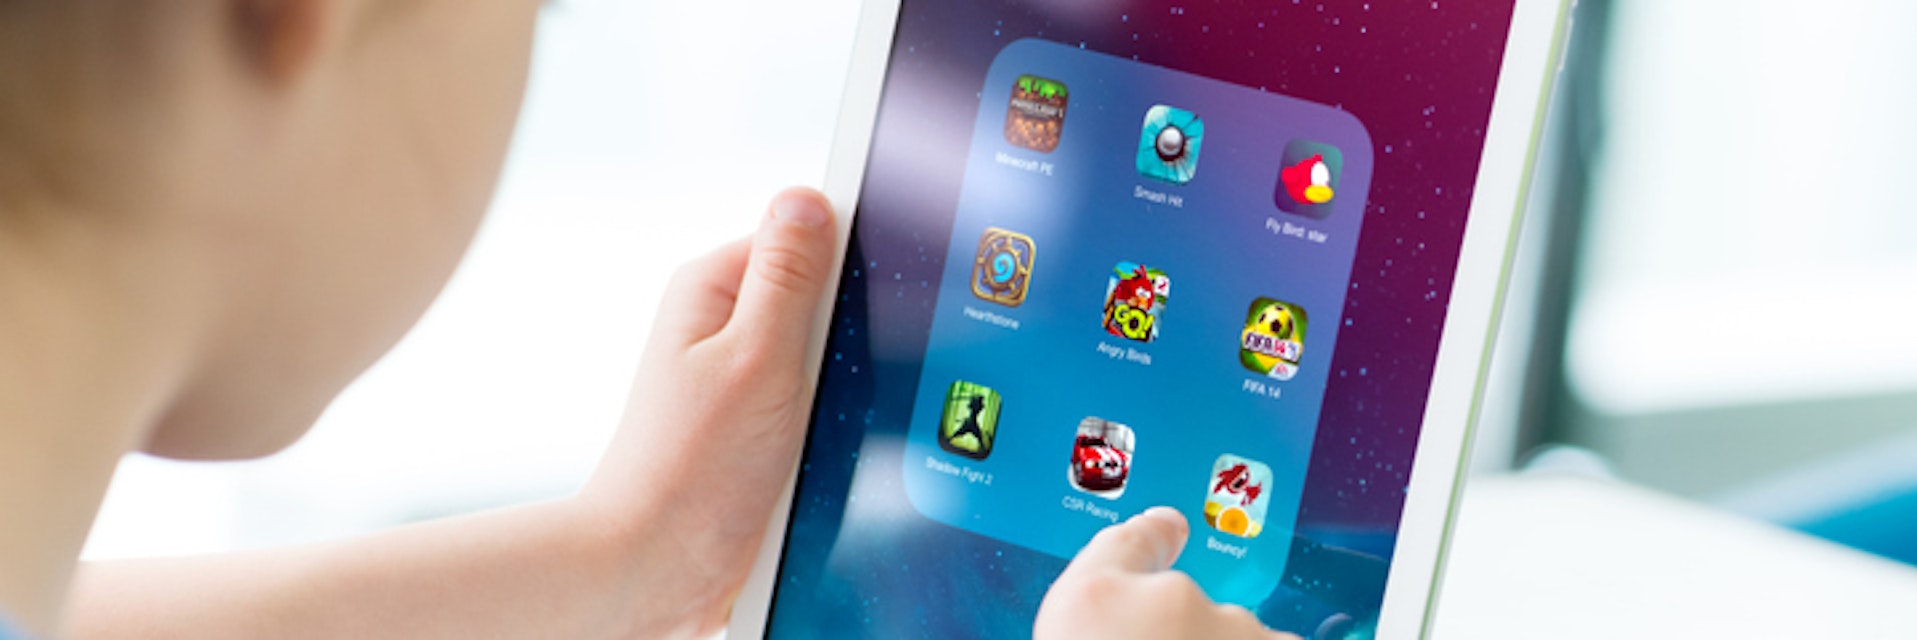 13 Best Math Apps for Kids That Engage and Boost Learning